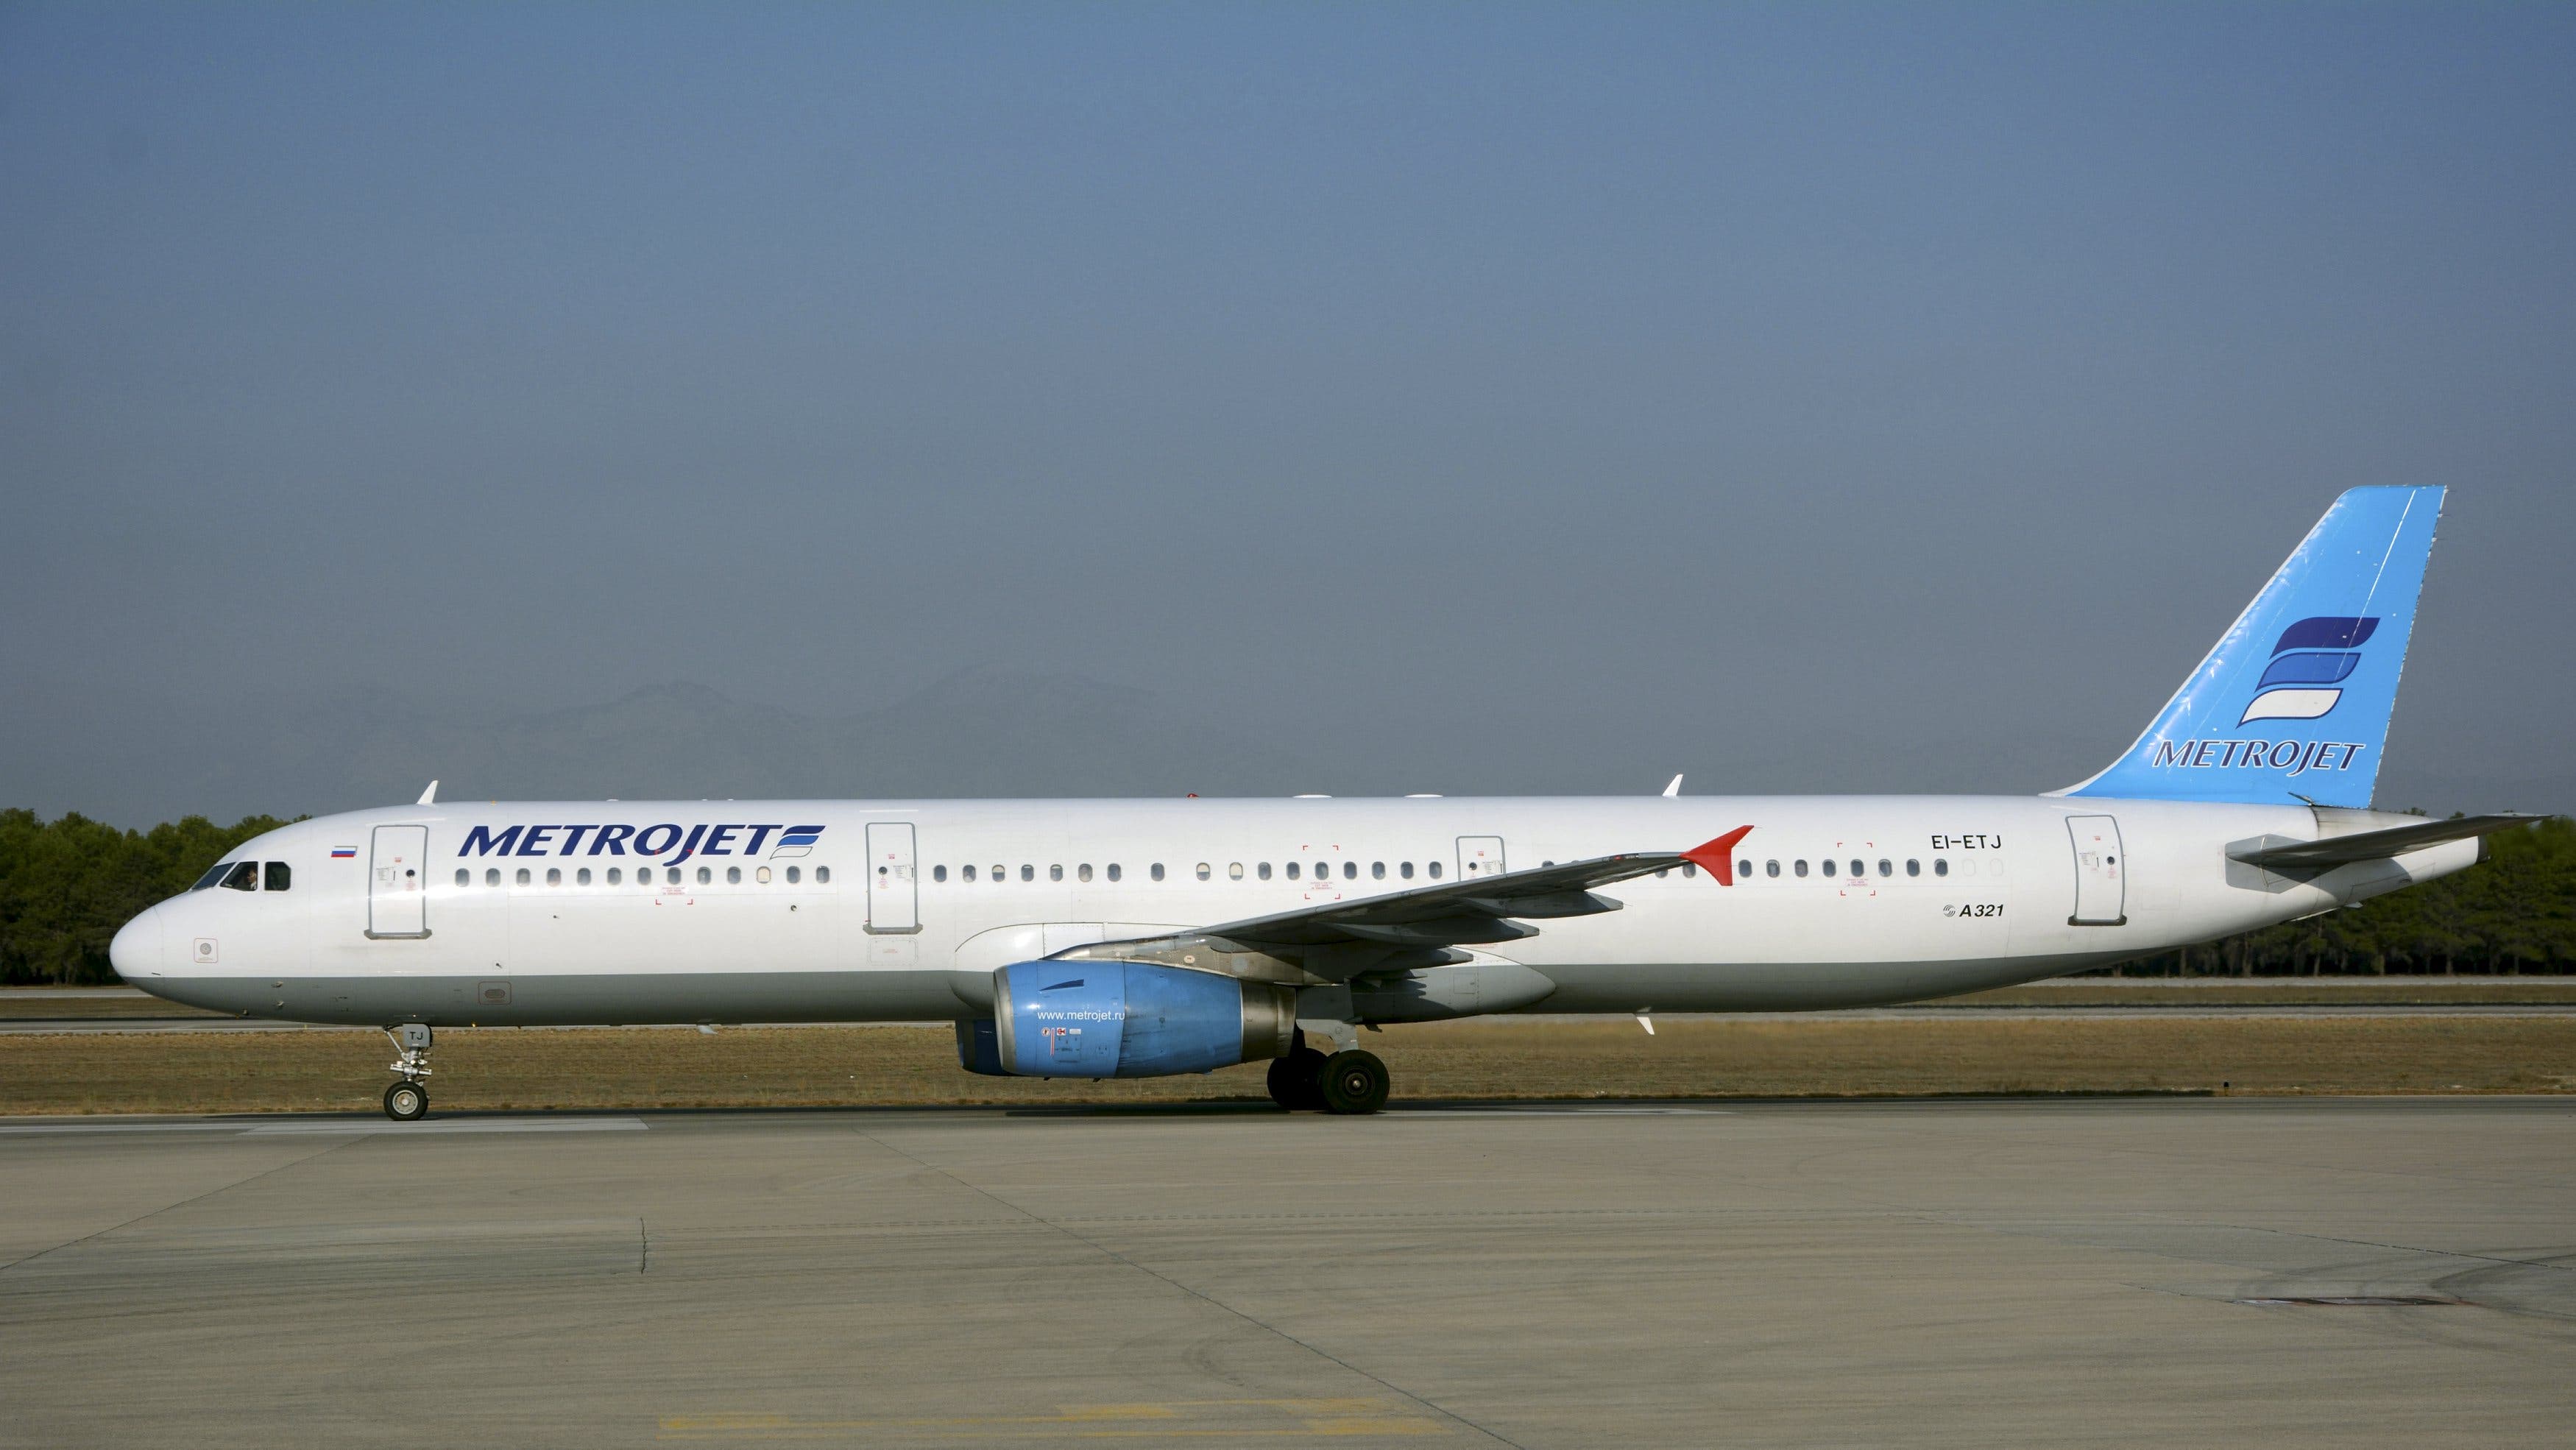 The Metrojet's Airbus A-321 with registration number EI-ETJ that crashed in Egypt's Sinai peninsula, is seen in this picture taken in Antalya, Turkey September 17, 2015. (Reuters) 